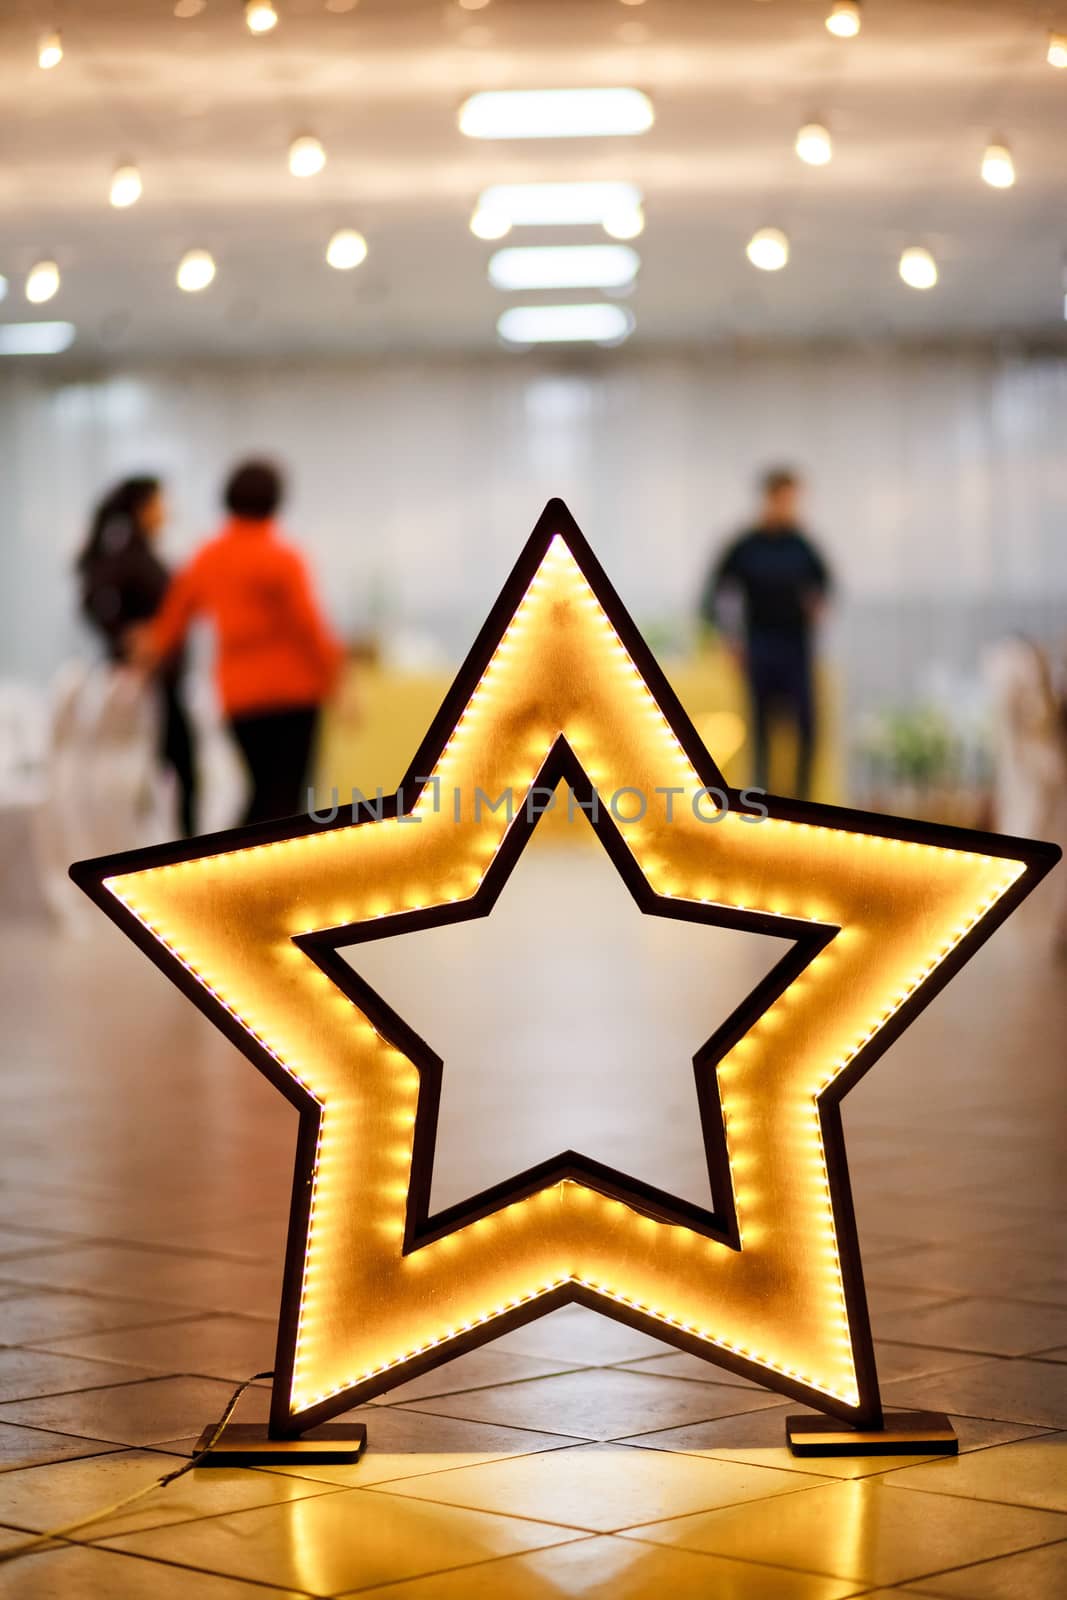 Decorative star made of wood with LED backlight on the floor, preparing for the wedding party.